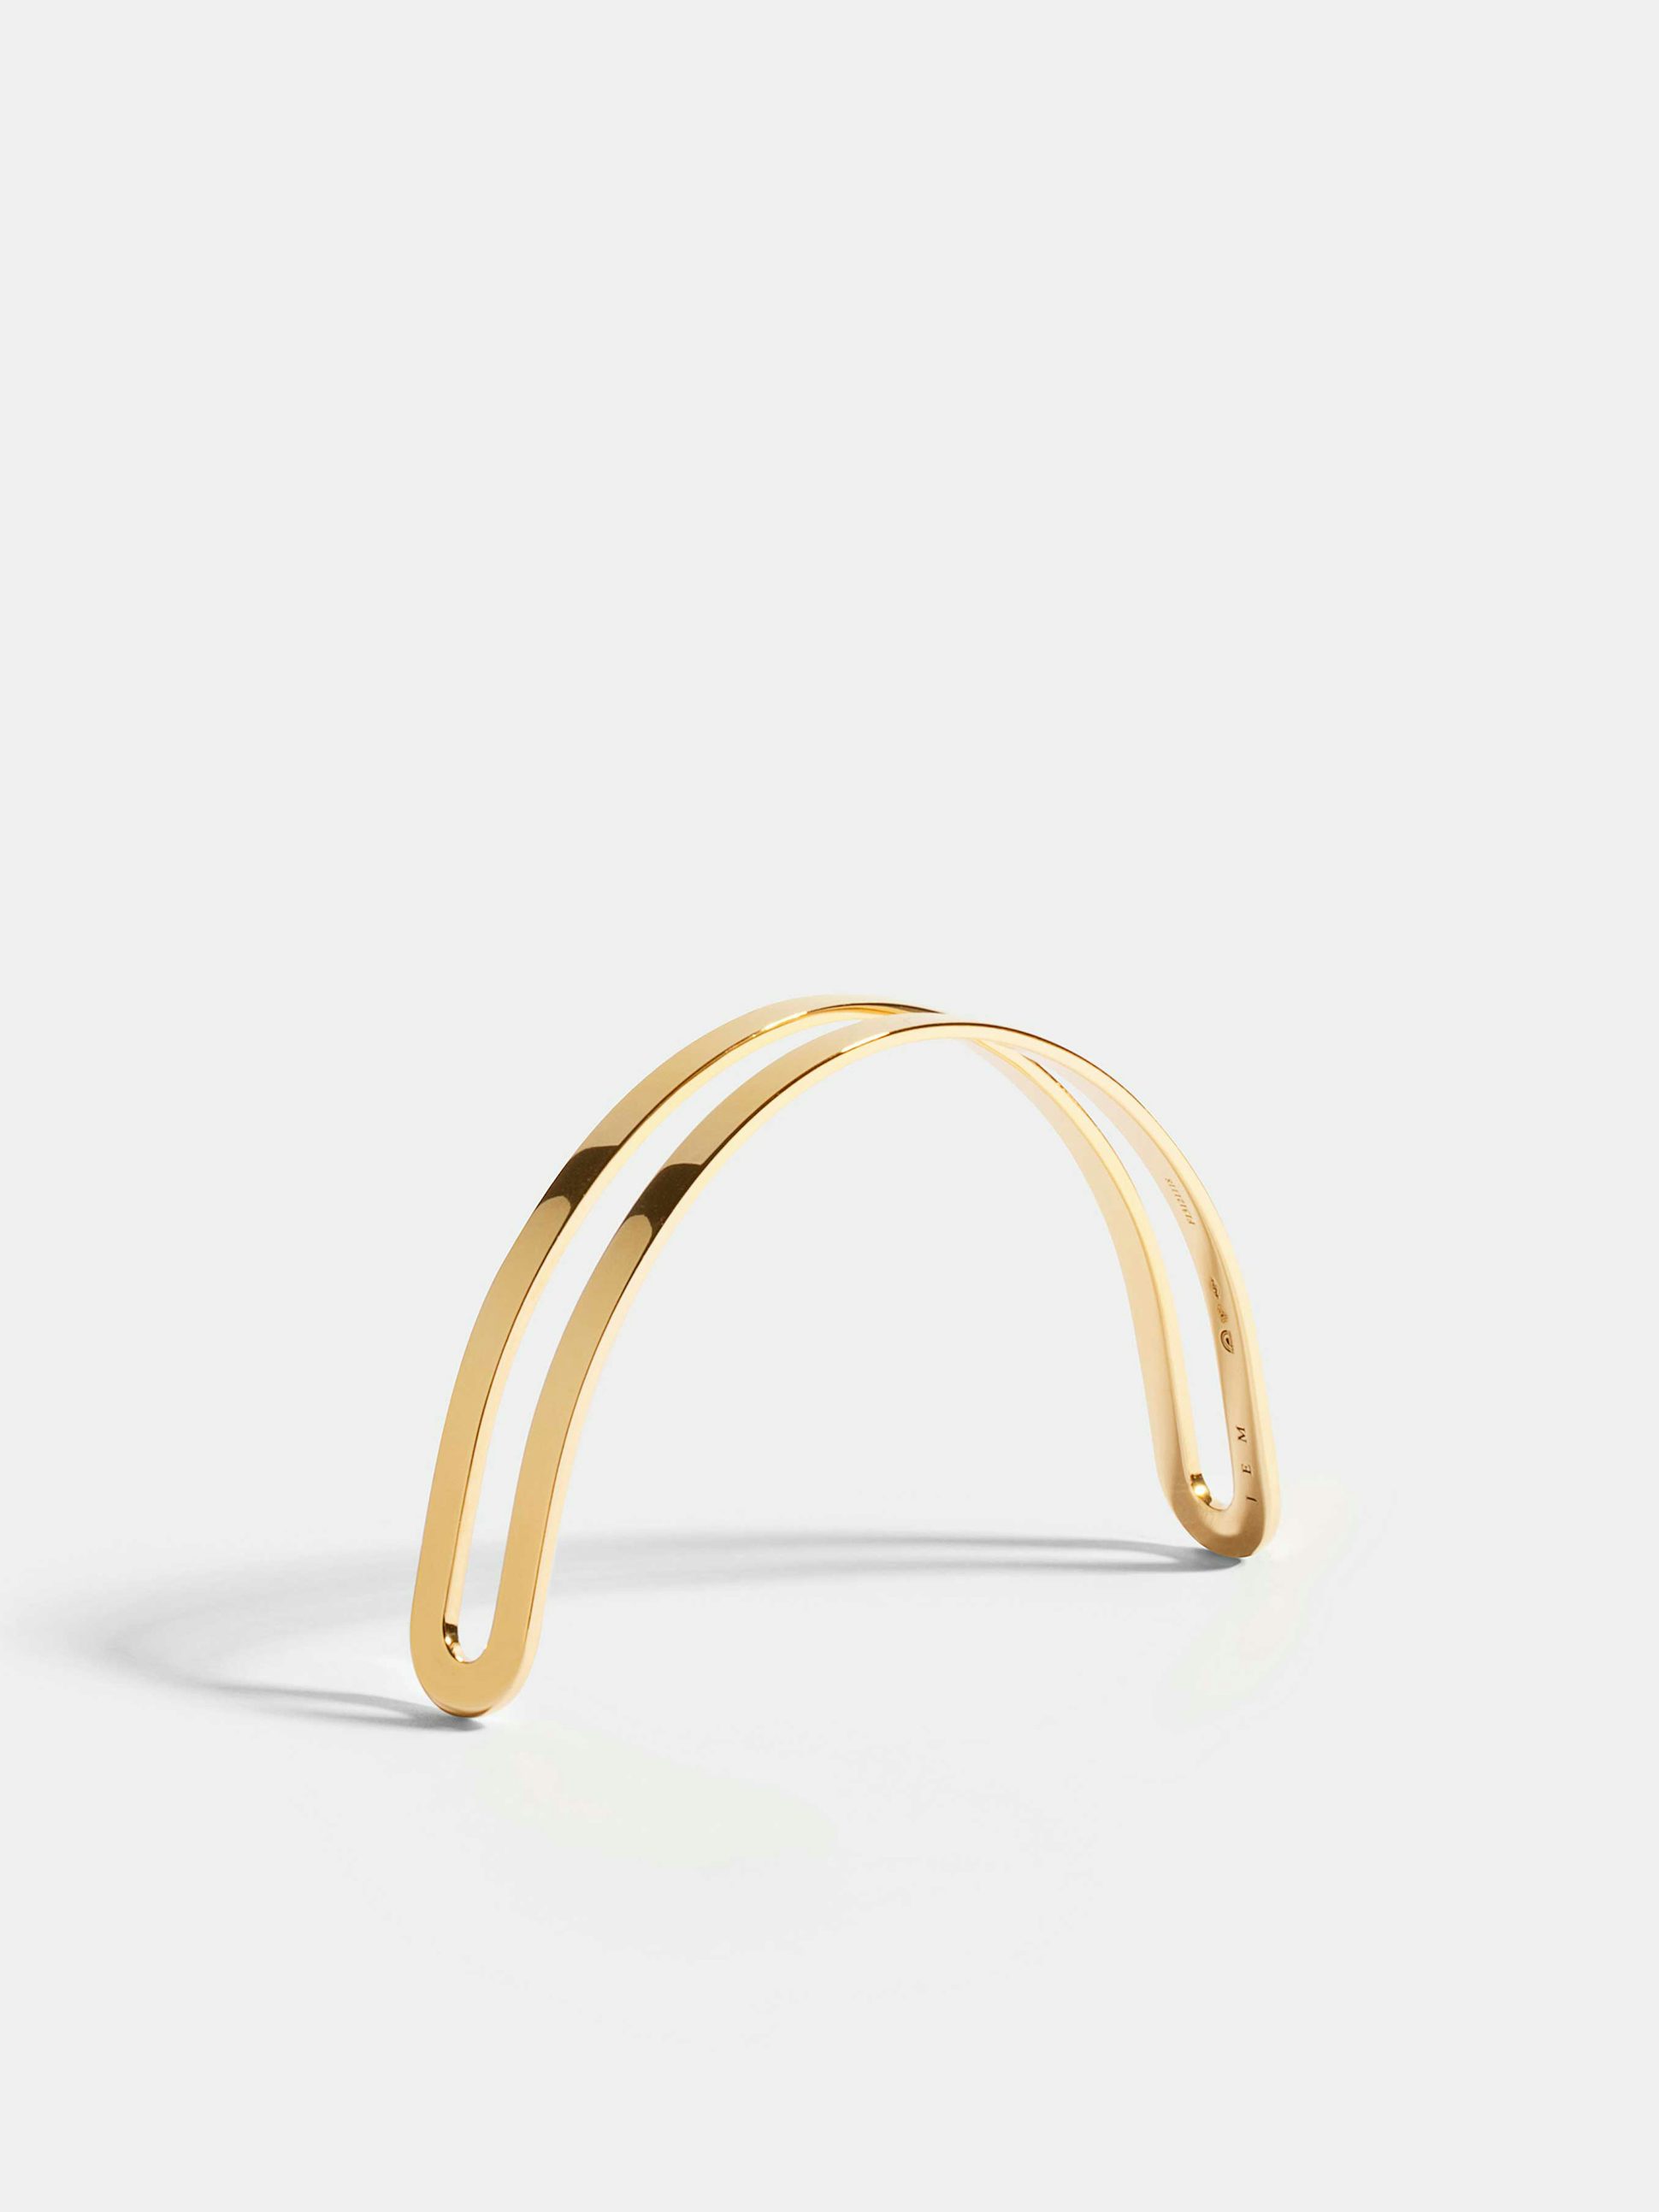 Étreintes simple half-bracelet in 18k Fairmined ethical yellow gold with a polished finish.